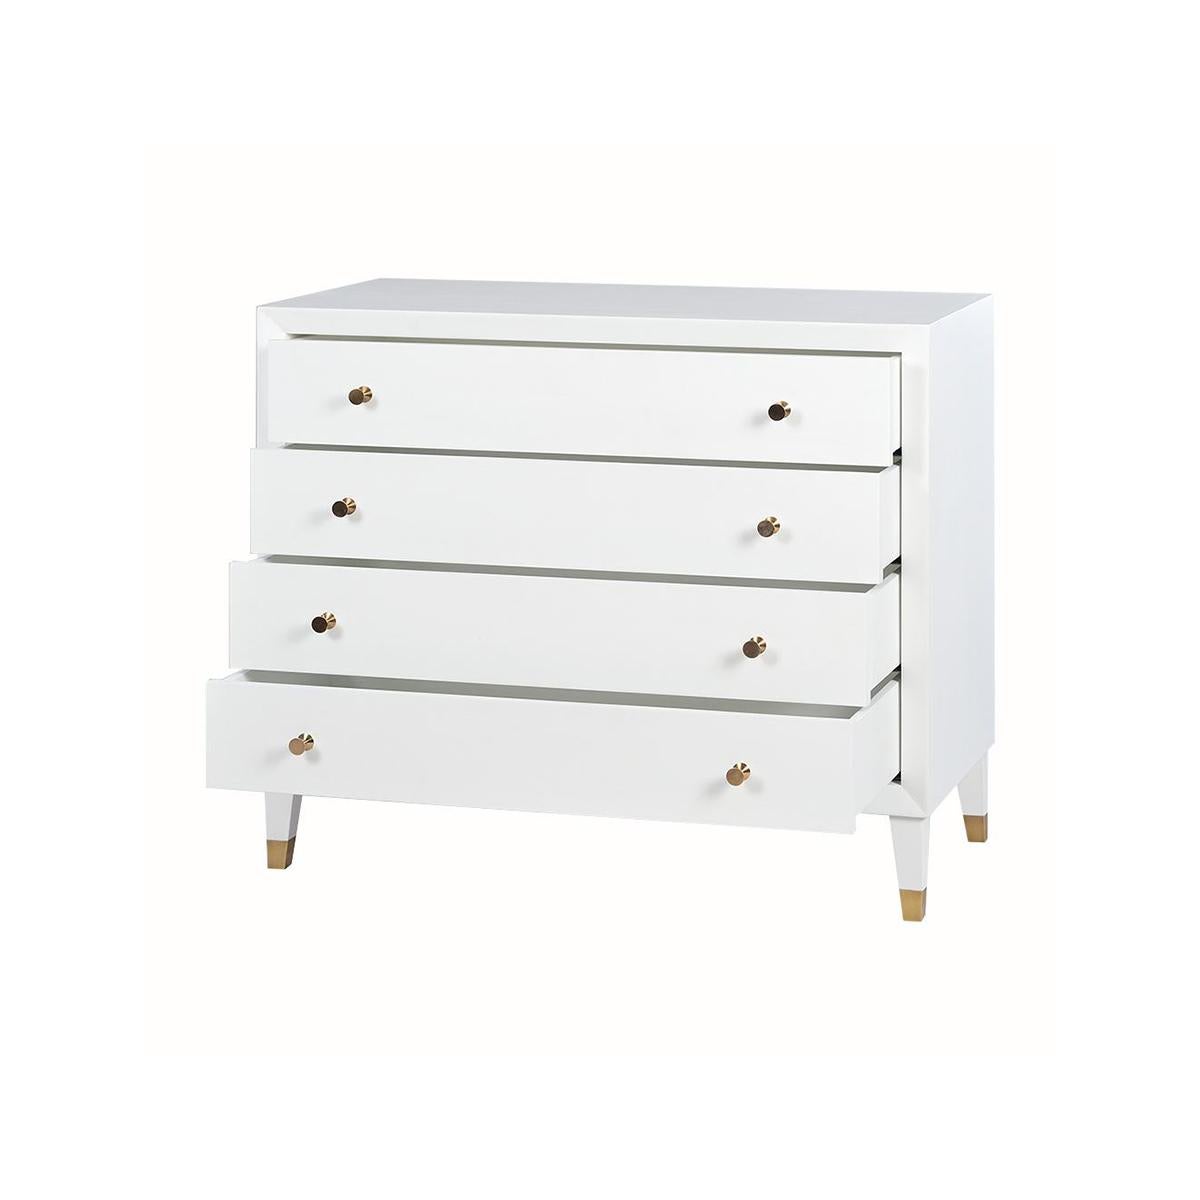 Introducing our gorgeous Mid-Century style painted dresser, a chest that will bring a touch of modern elegance to any space. The chest boasts a stunning satin-painted ghost-white finish that is sure to captivate the eye.

With four spacious